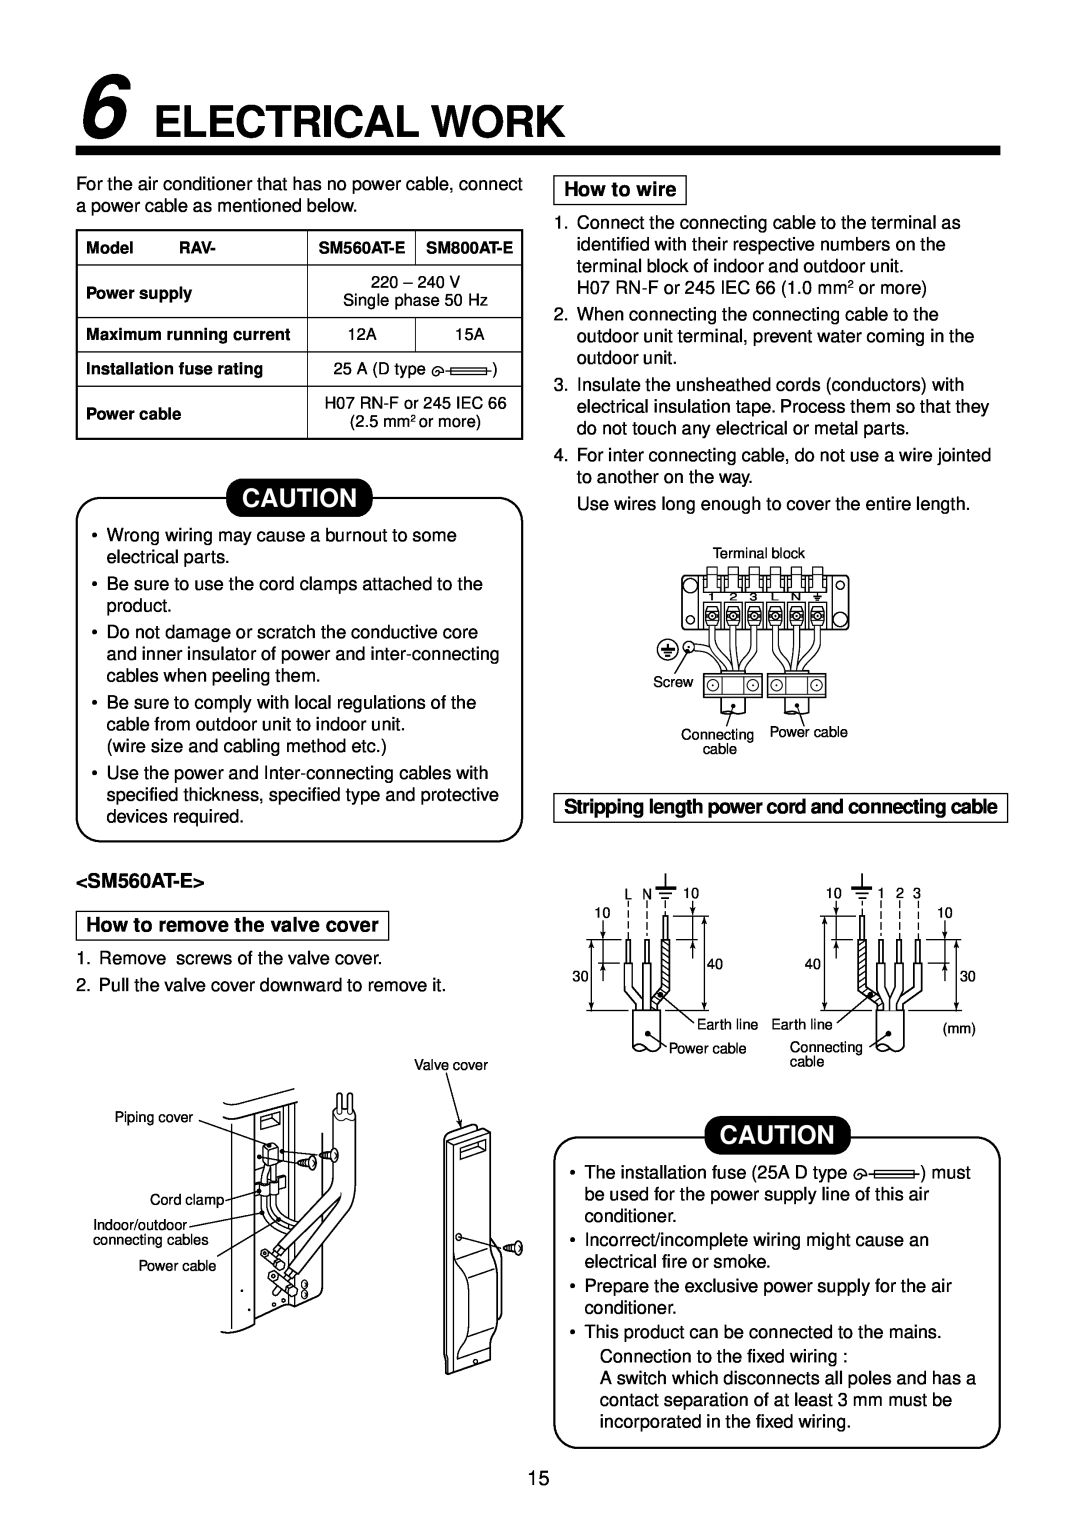 Toshiba R410A service manual Electrical Work, <SM560AT-E> How to remove the valve cover, How to wire 